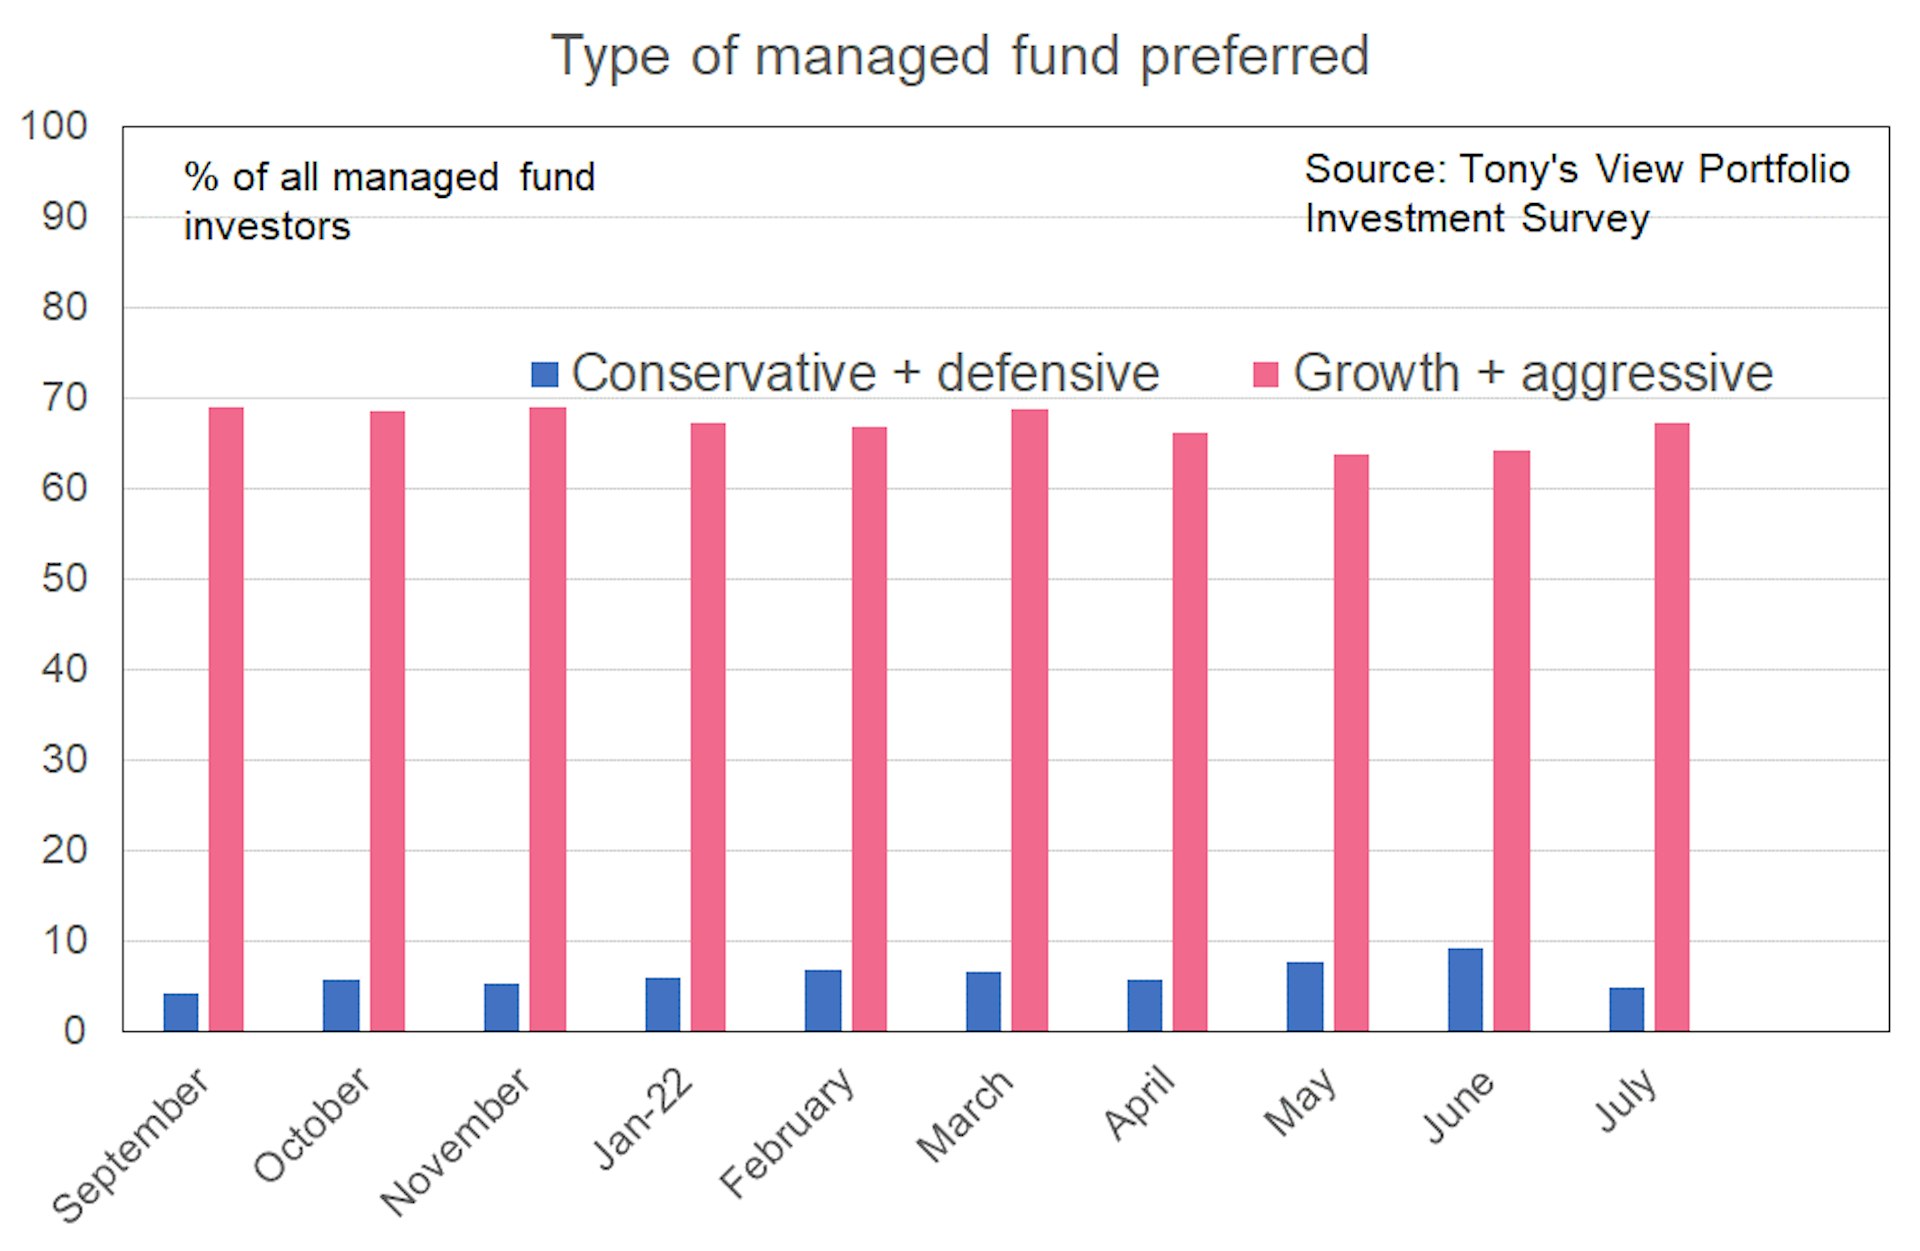 Bar graph showing the preference toward growth and aggressive managed funds rising from 62% in May 2022 to 68% in July 2022, while preference toward conservative and defensive managed funds decreasing from 9% in June 2022 to 5% in July 2022. 